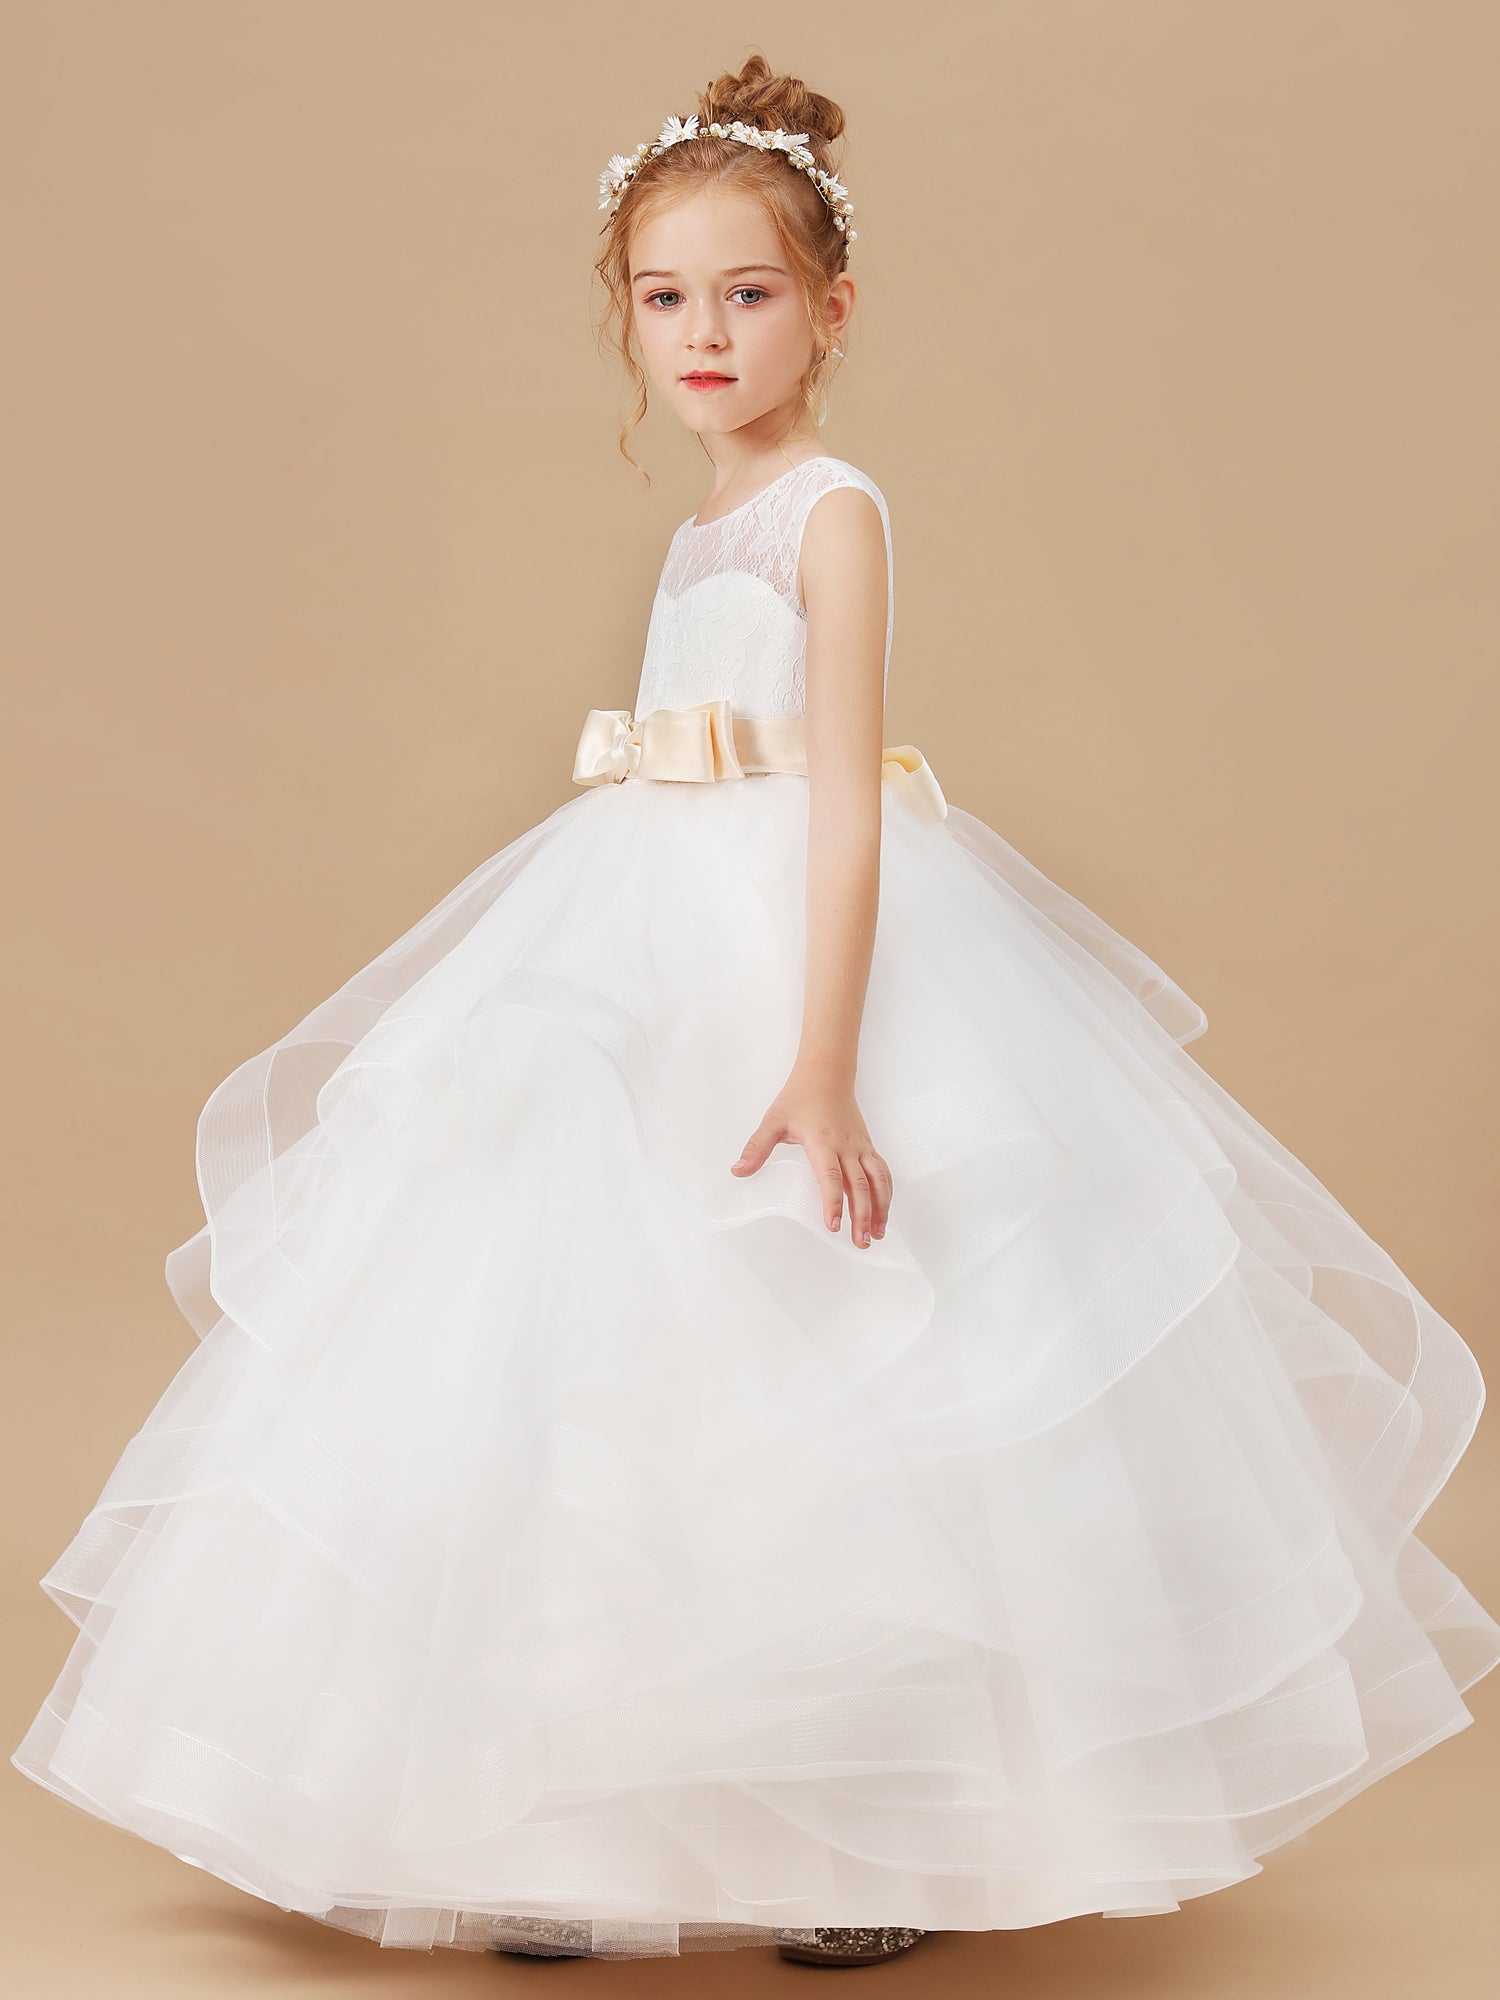 WDE Satin First Communion Dresses for Girls with India | Ubuy